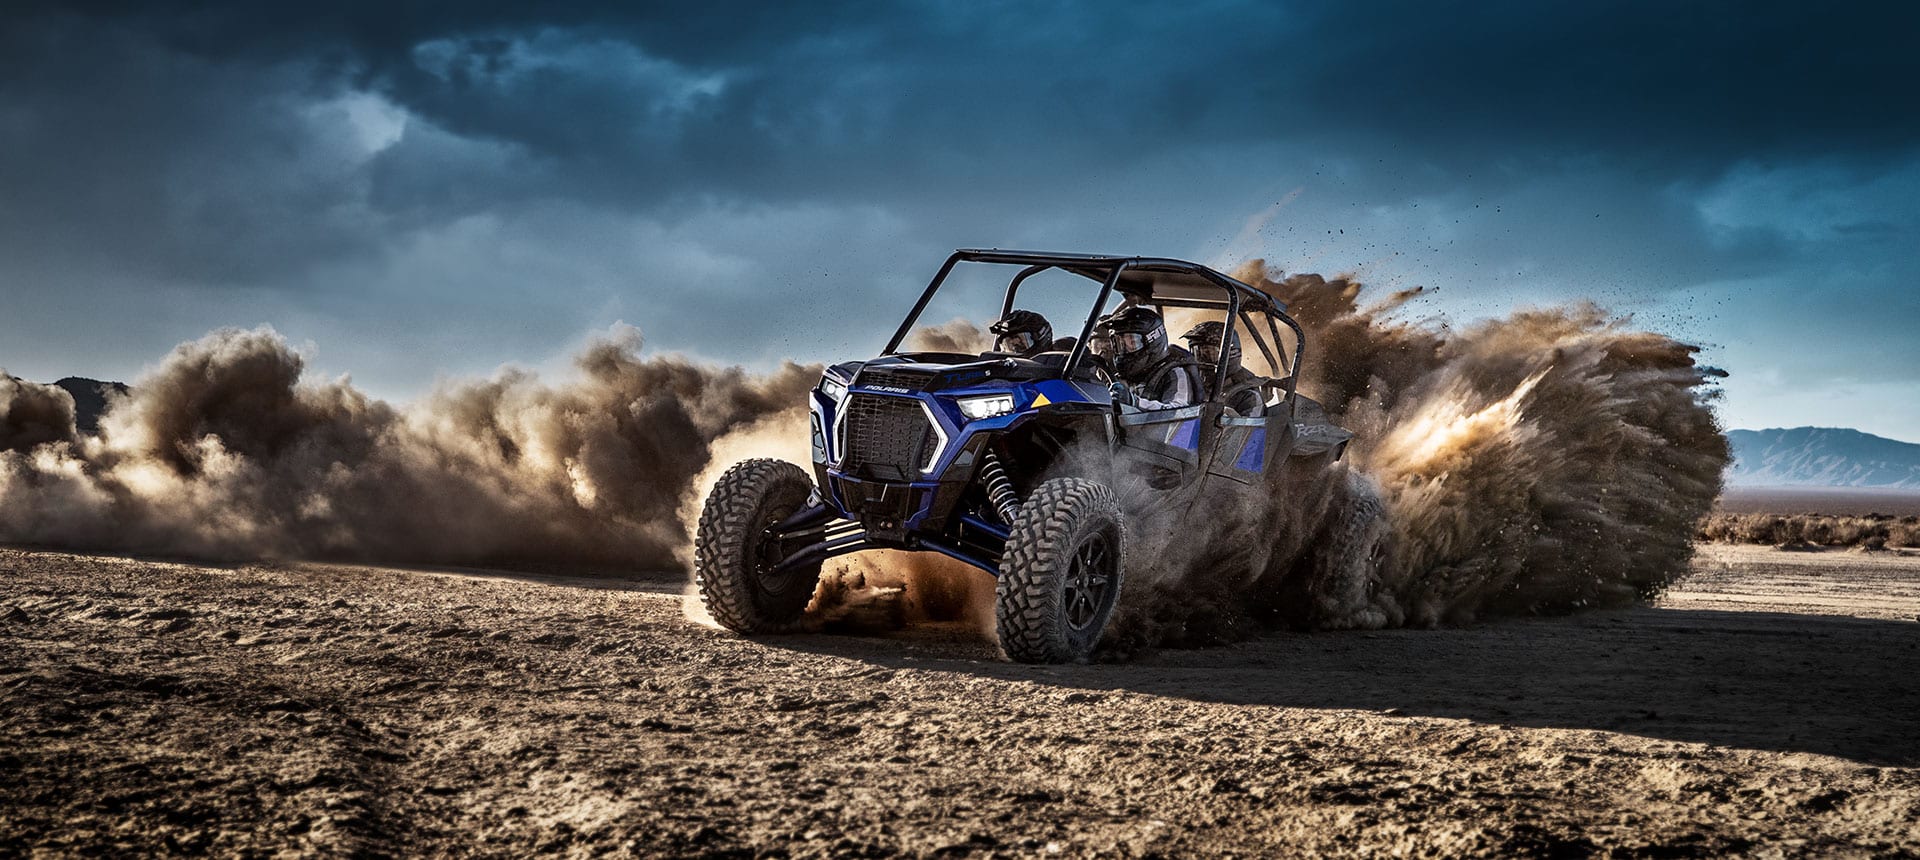 RZR XP 4 TOURBO S 4 SEATER OFFROAD VEHICLE